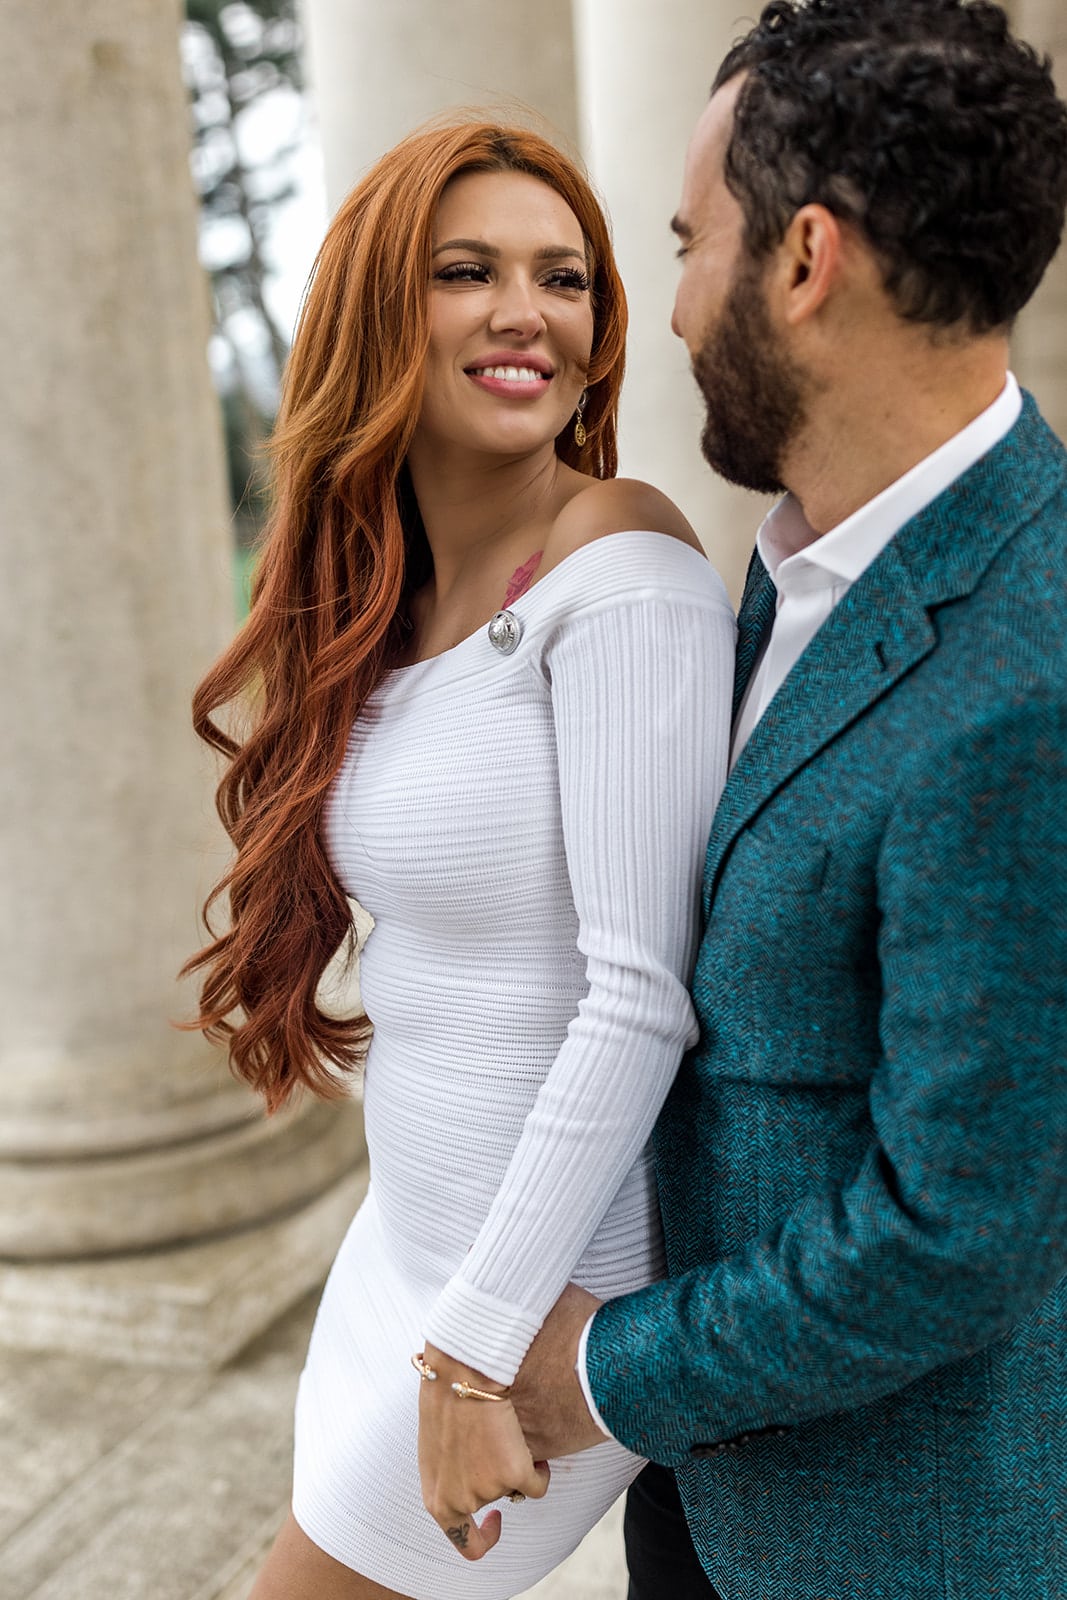 Woman smiles at man during engagement photos, bay area